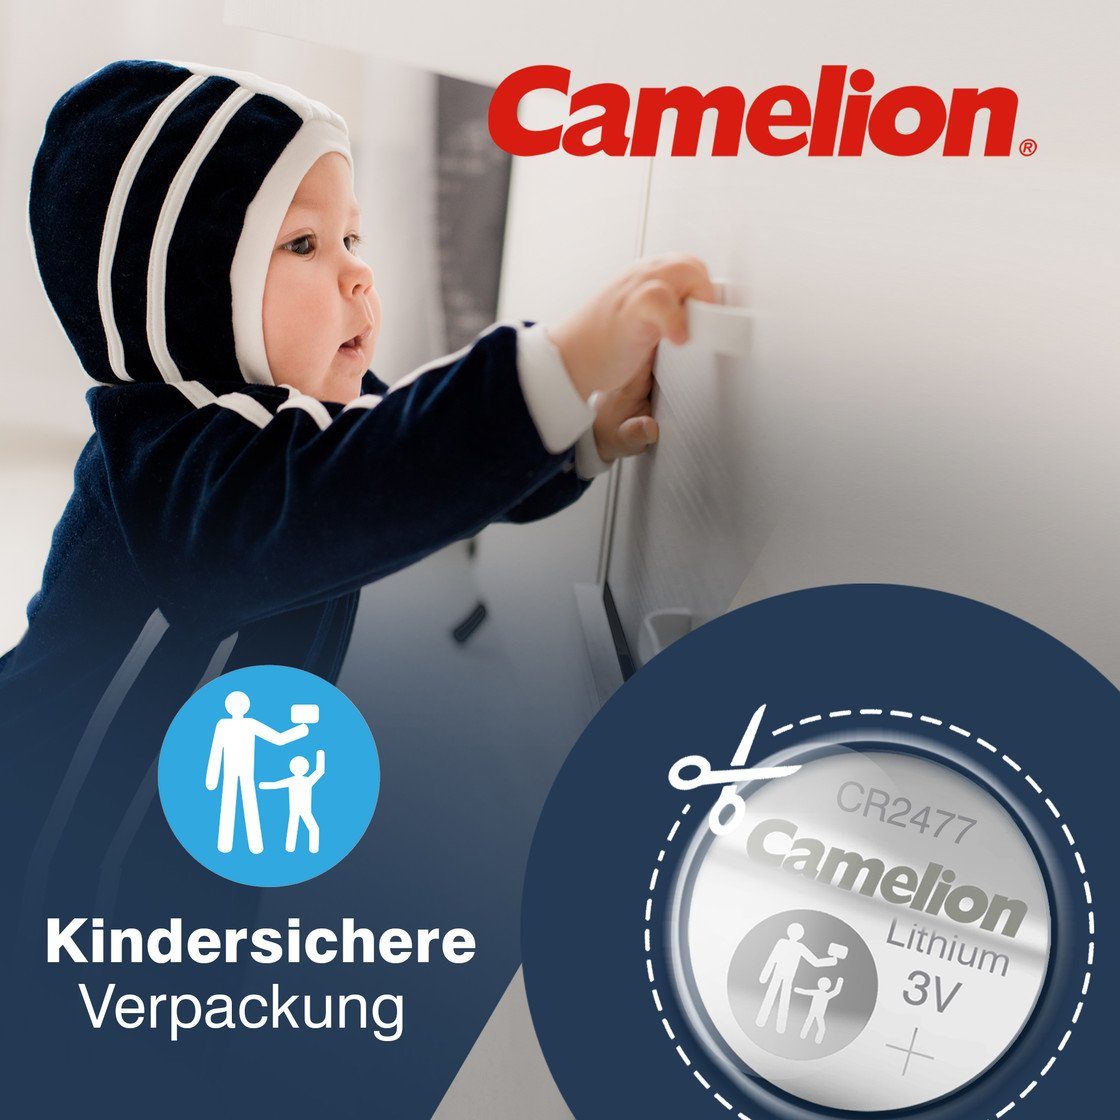 Camelion – Blister Alarmanlage ® 3 gws-powercell CR2477 Lithium Knopfzelle ELECTRONICS LUPUS V